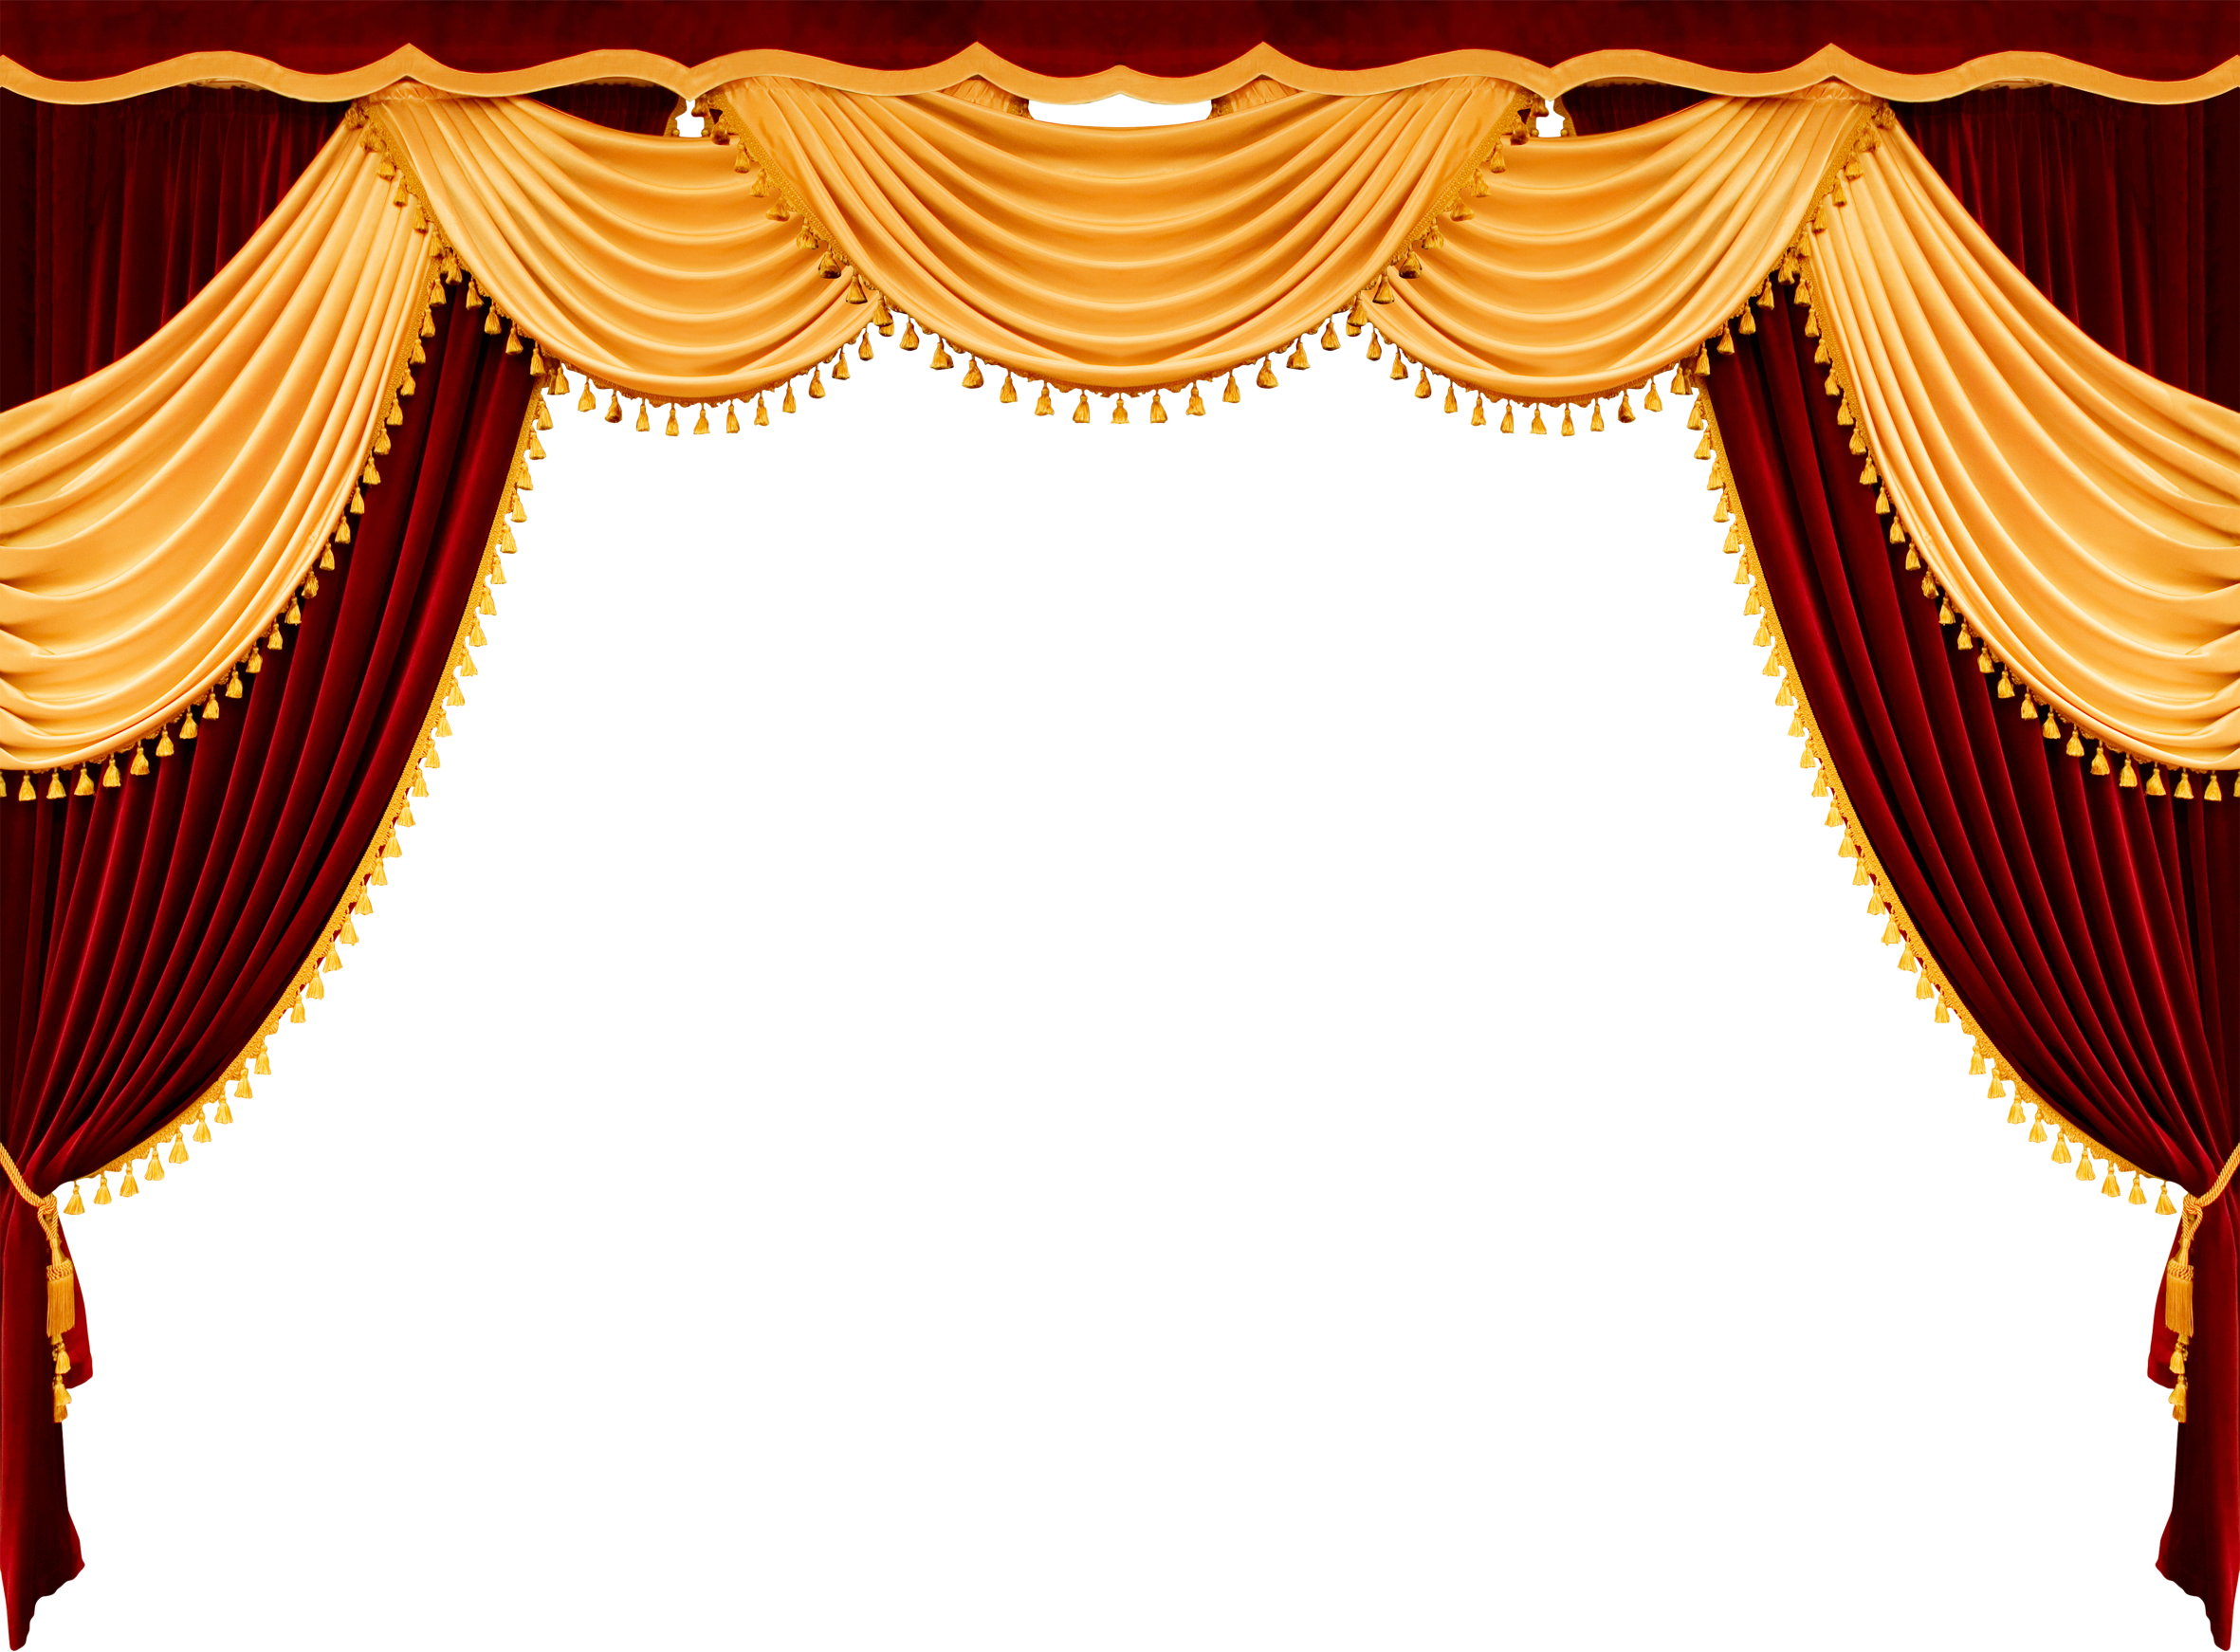 Curtains clipart gold.